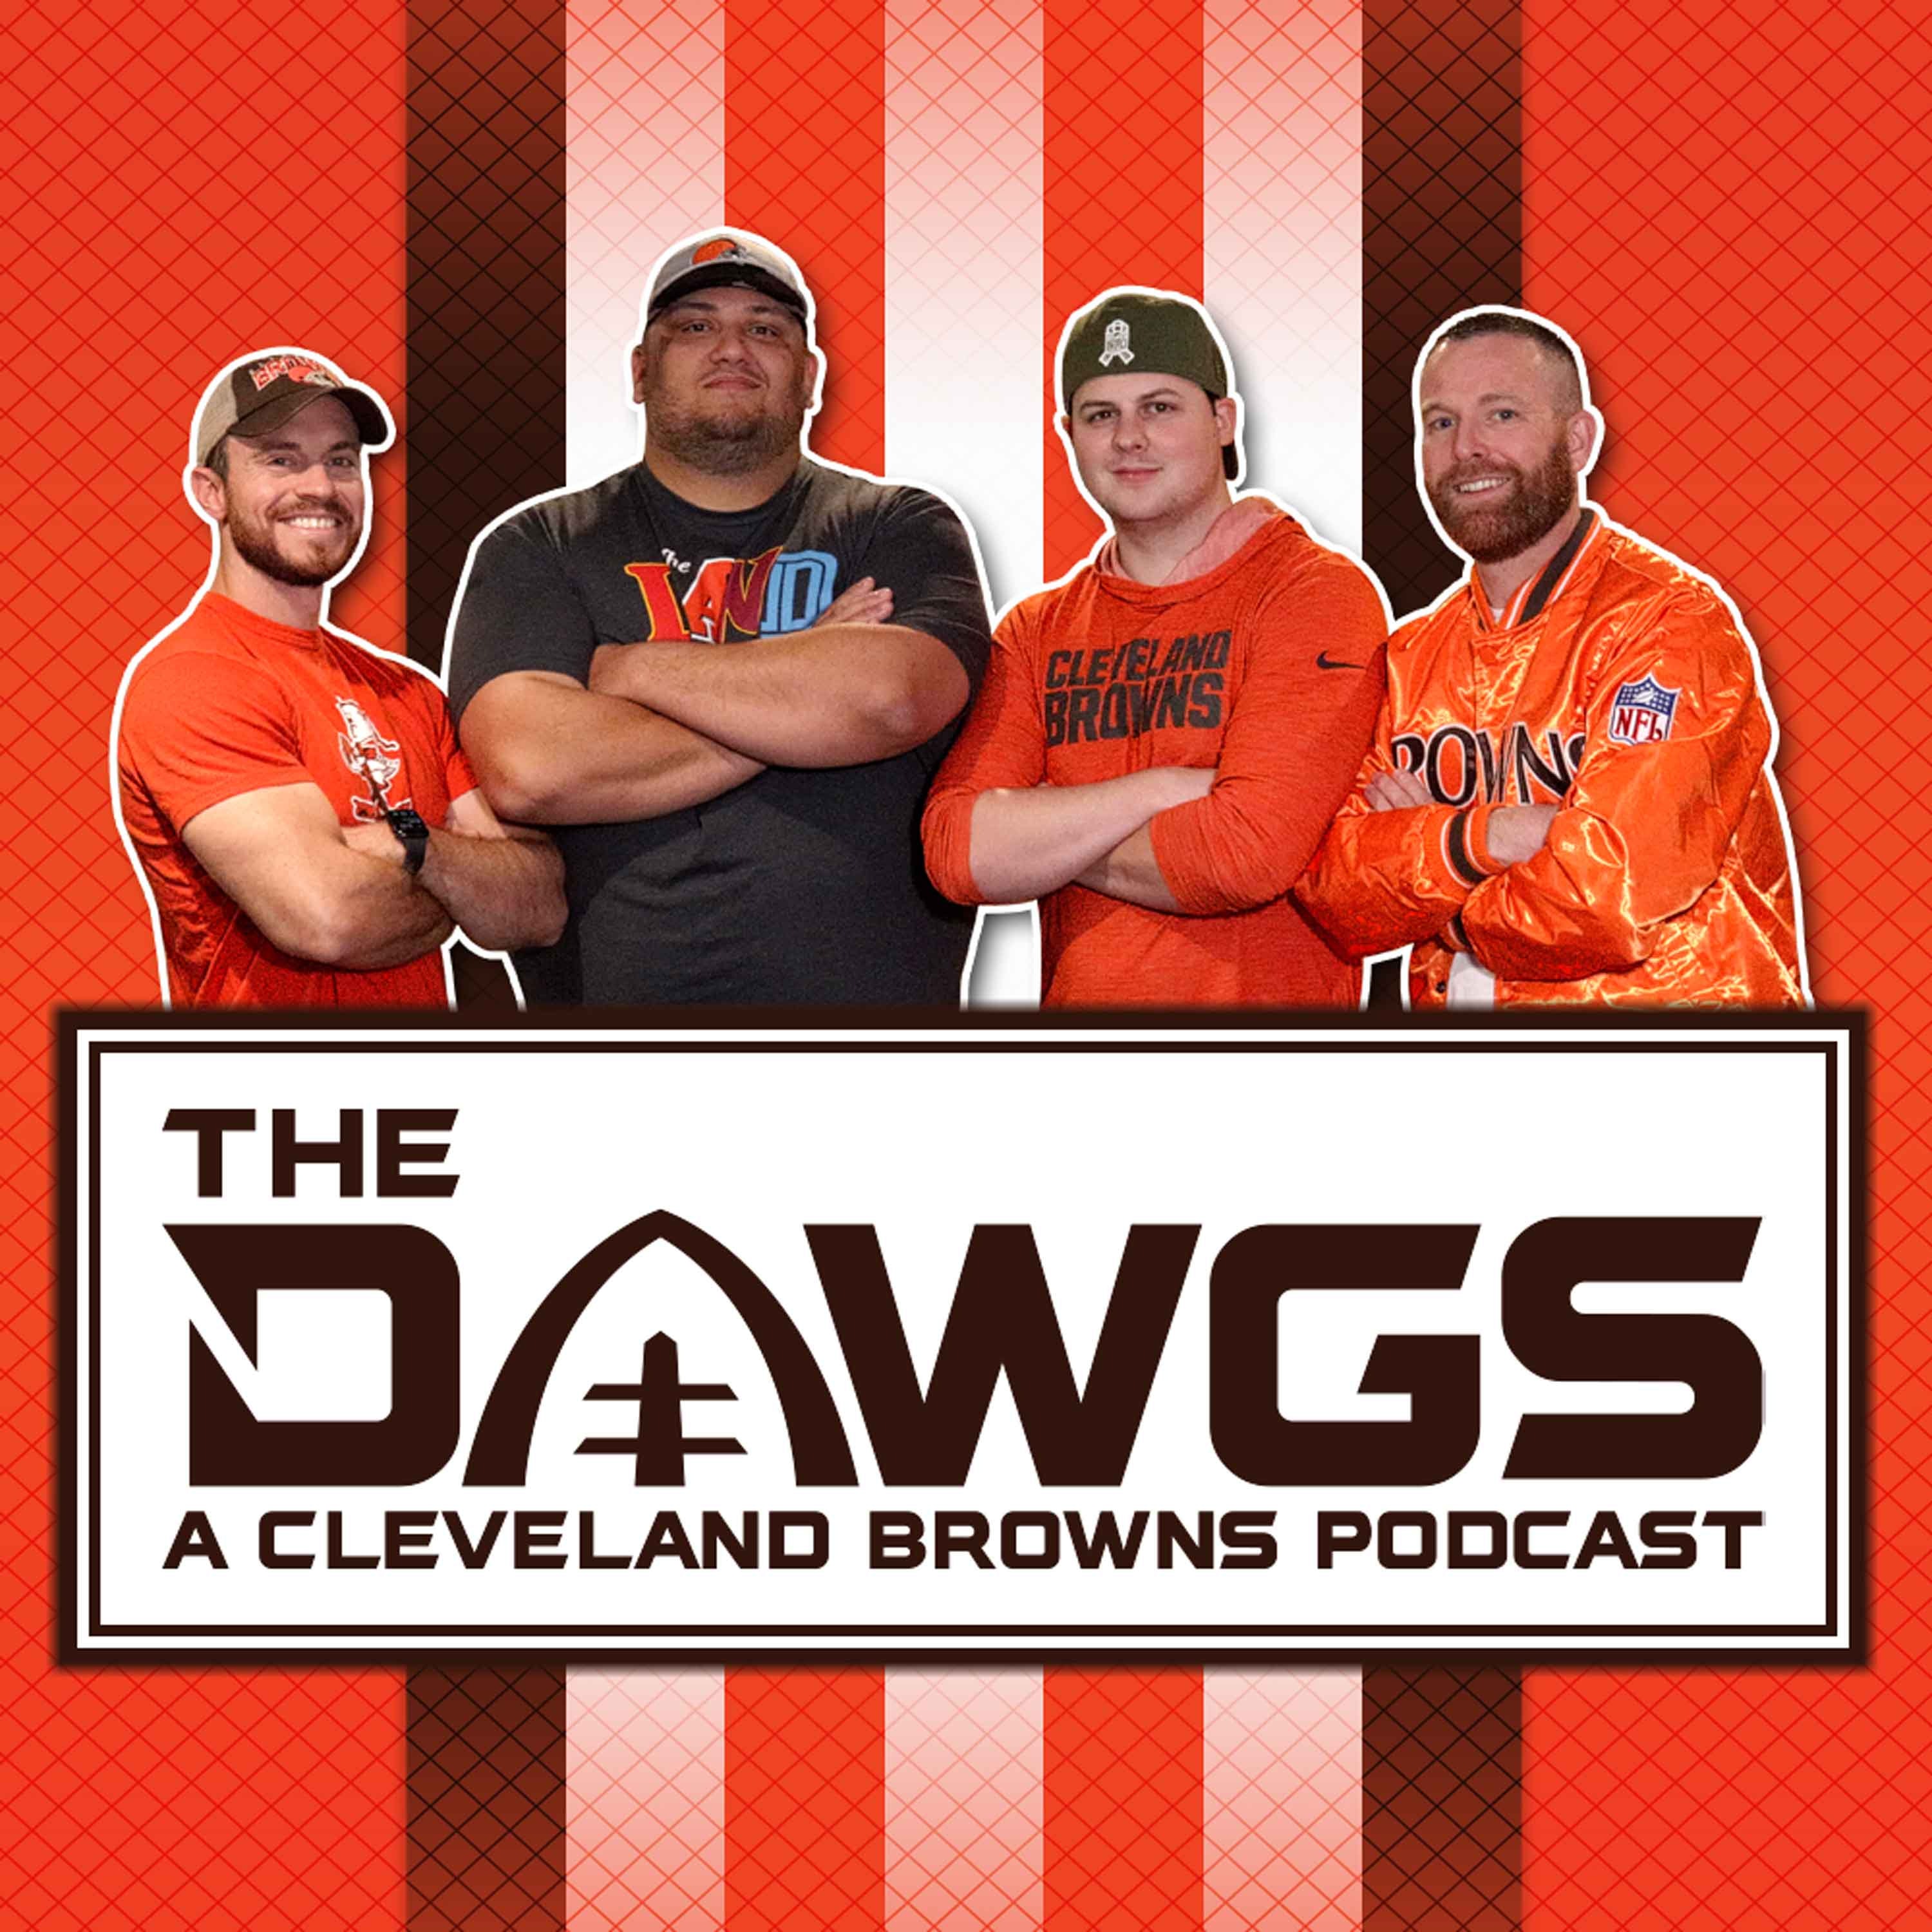 Jaguars Recap + Eagles Preview, Browns Rookies Steal the Show  | The Dawgs - A Cleveland Browns Podcast - August 15, 2022